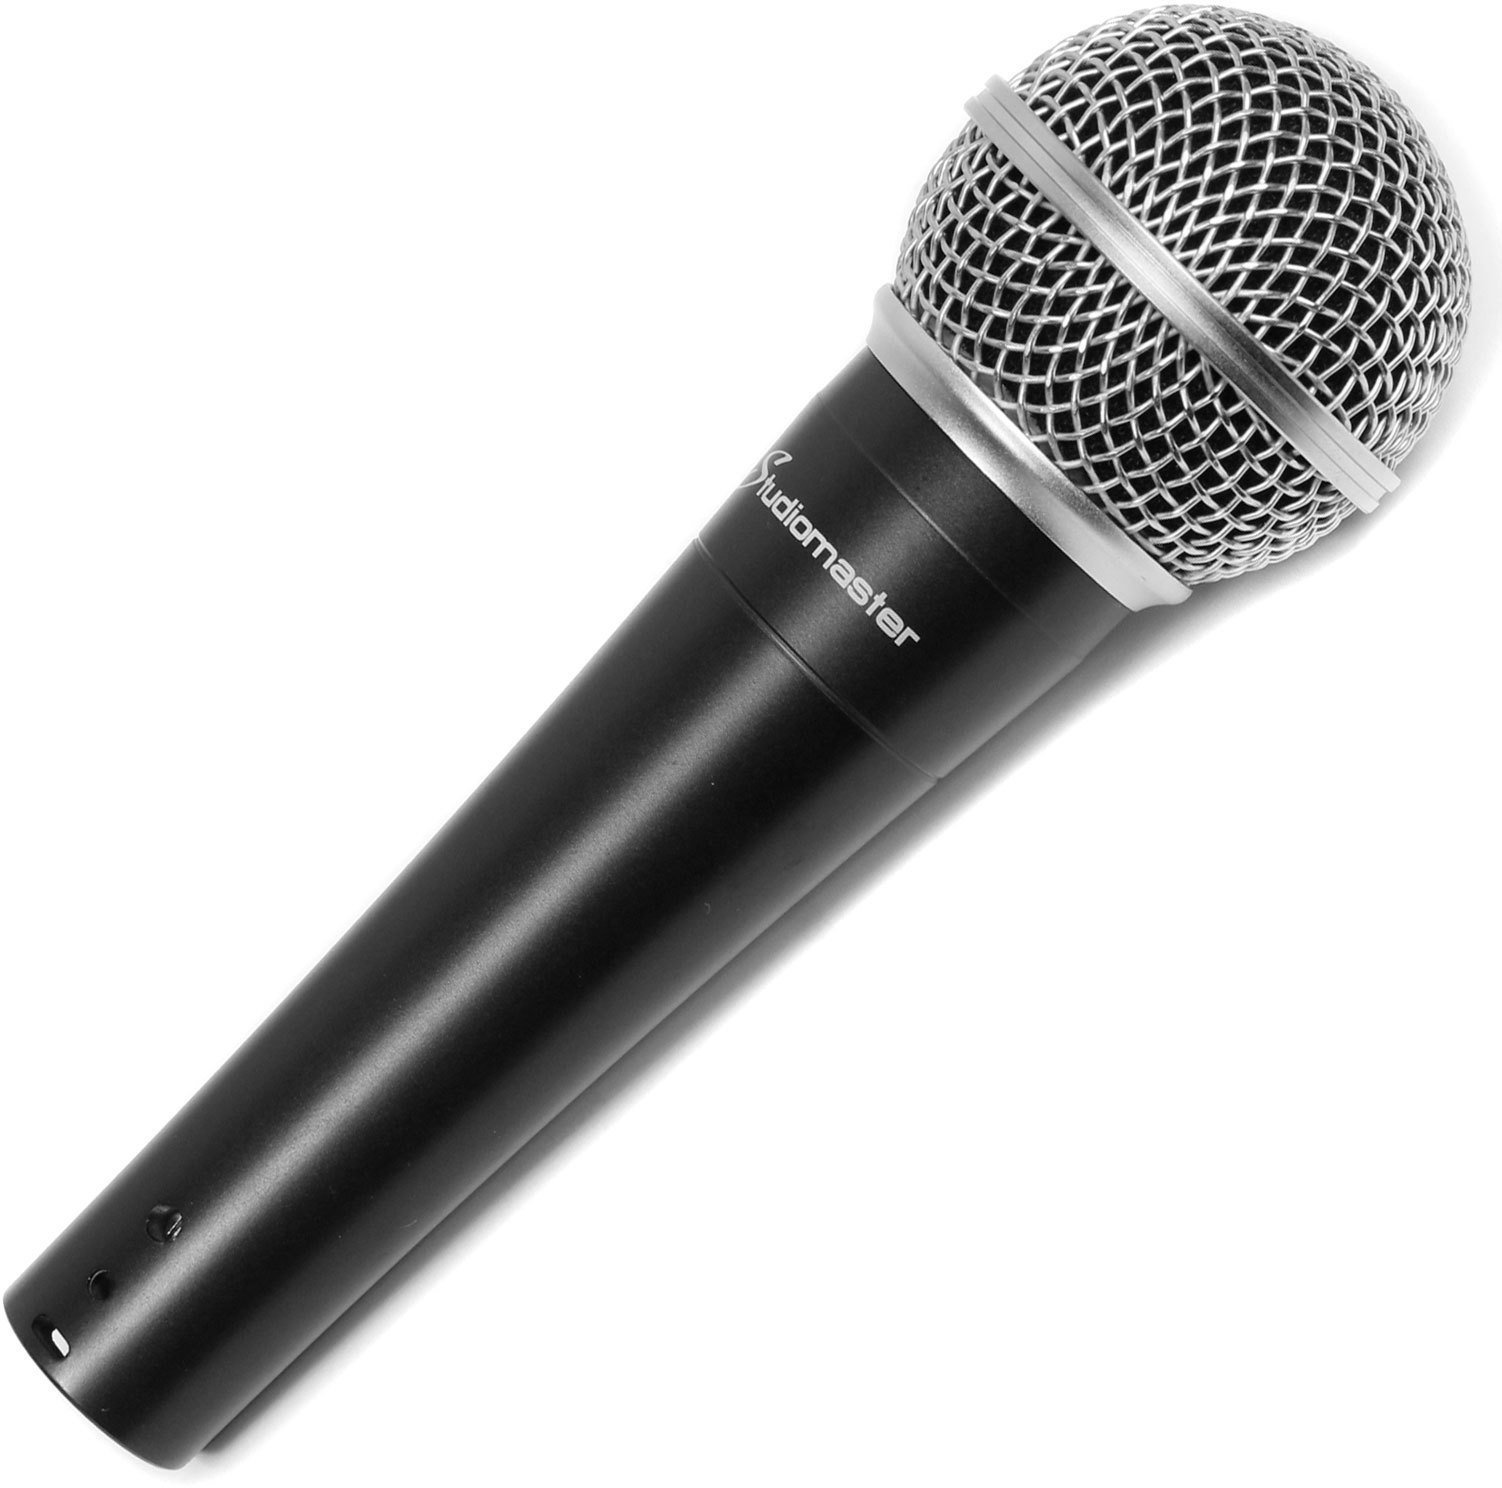 Vocal Dynamic Microphone Studiomaster KM92 Vocal Dynamic Microphone